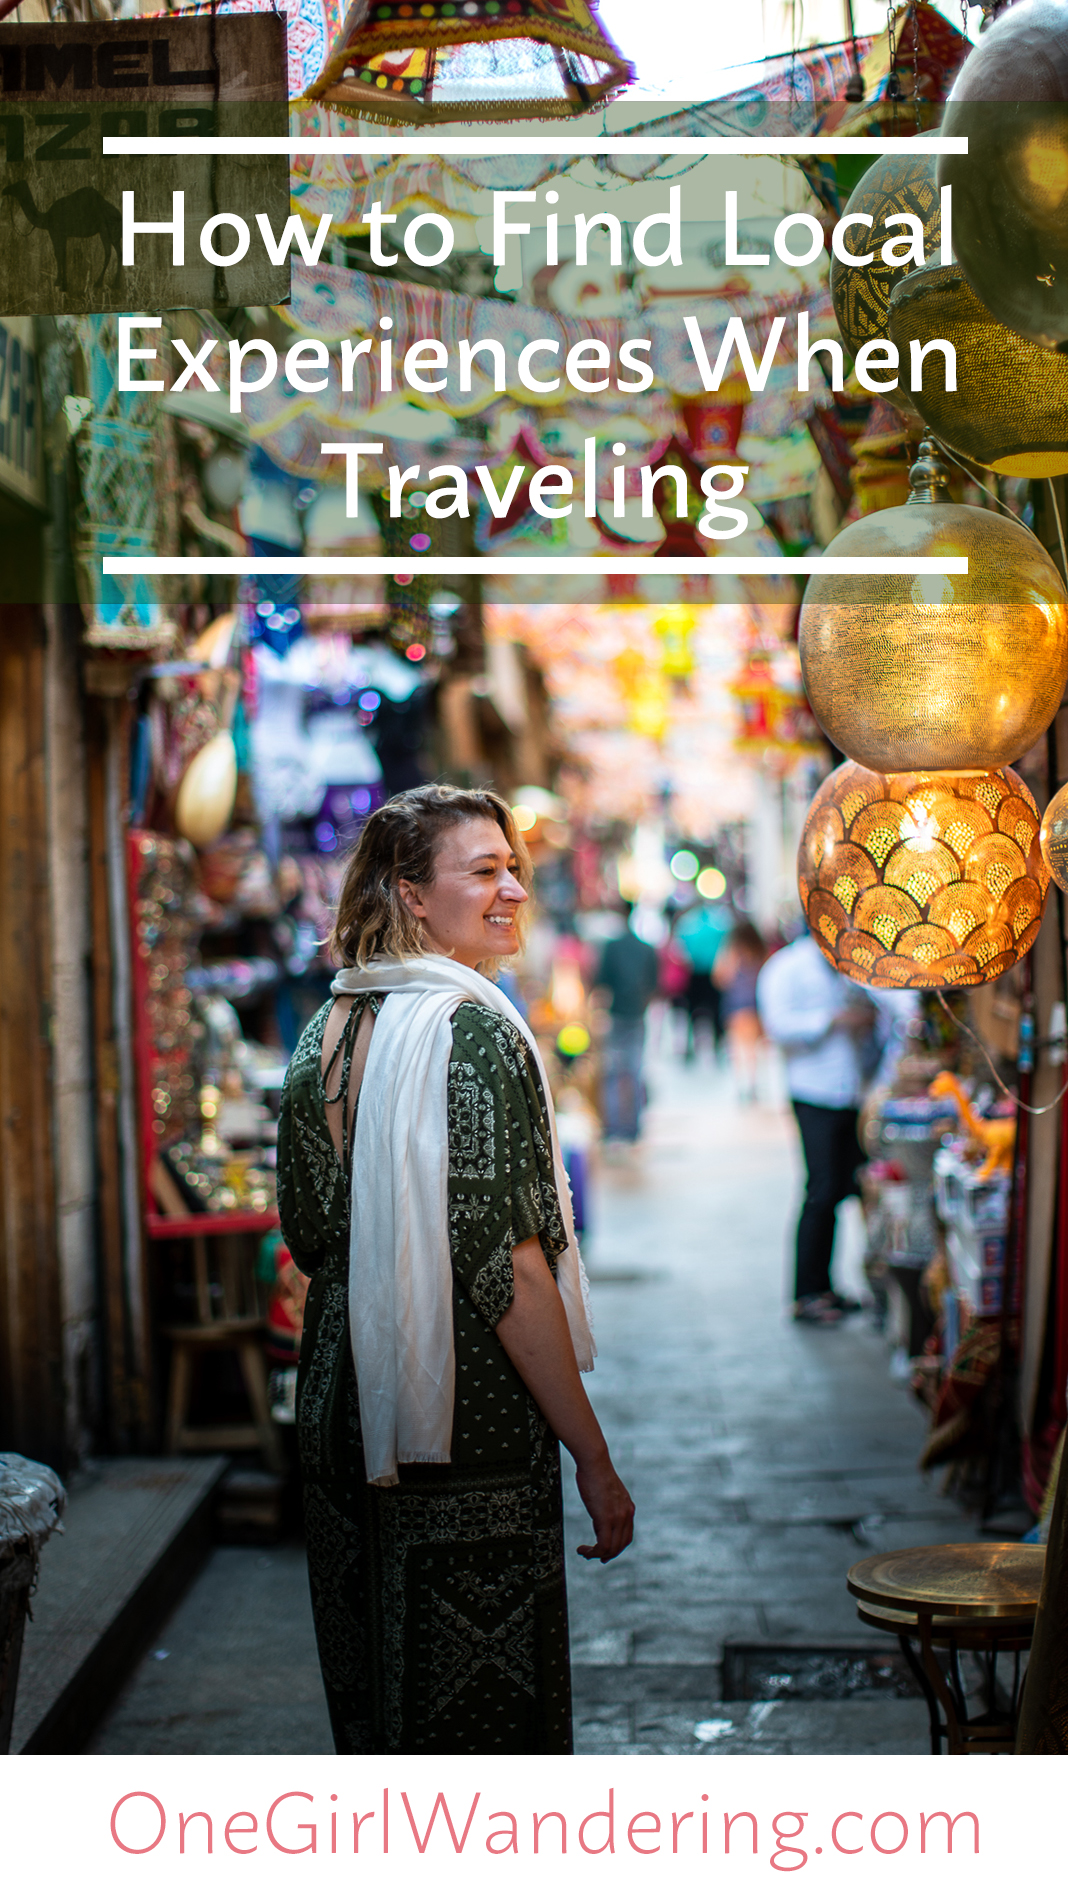 How to Find Local Experiences When Traveling - One Girl Wandering